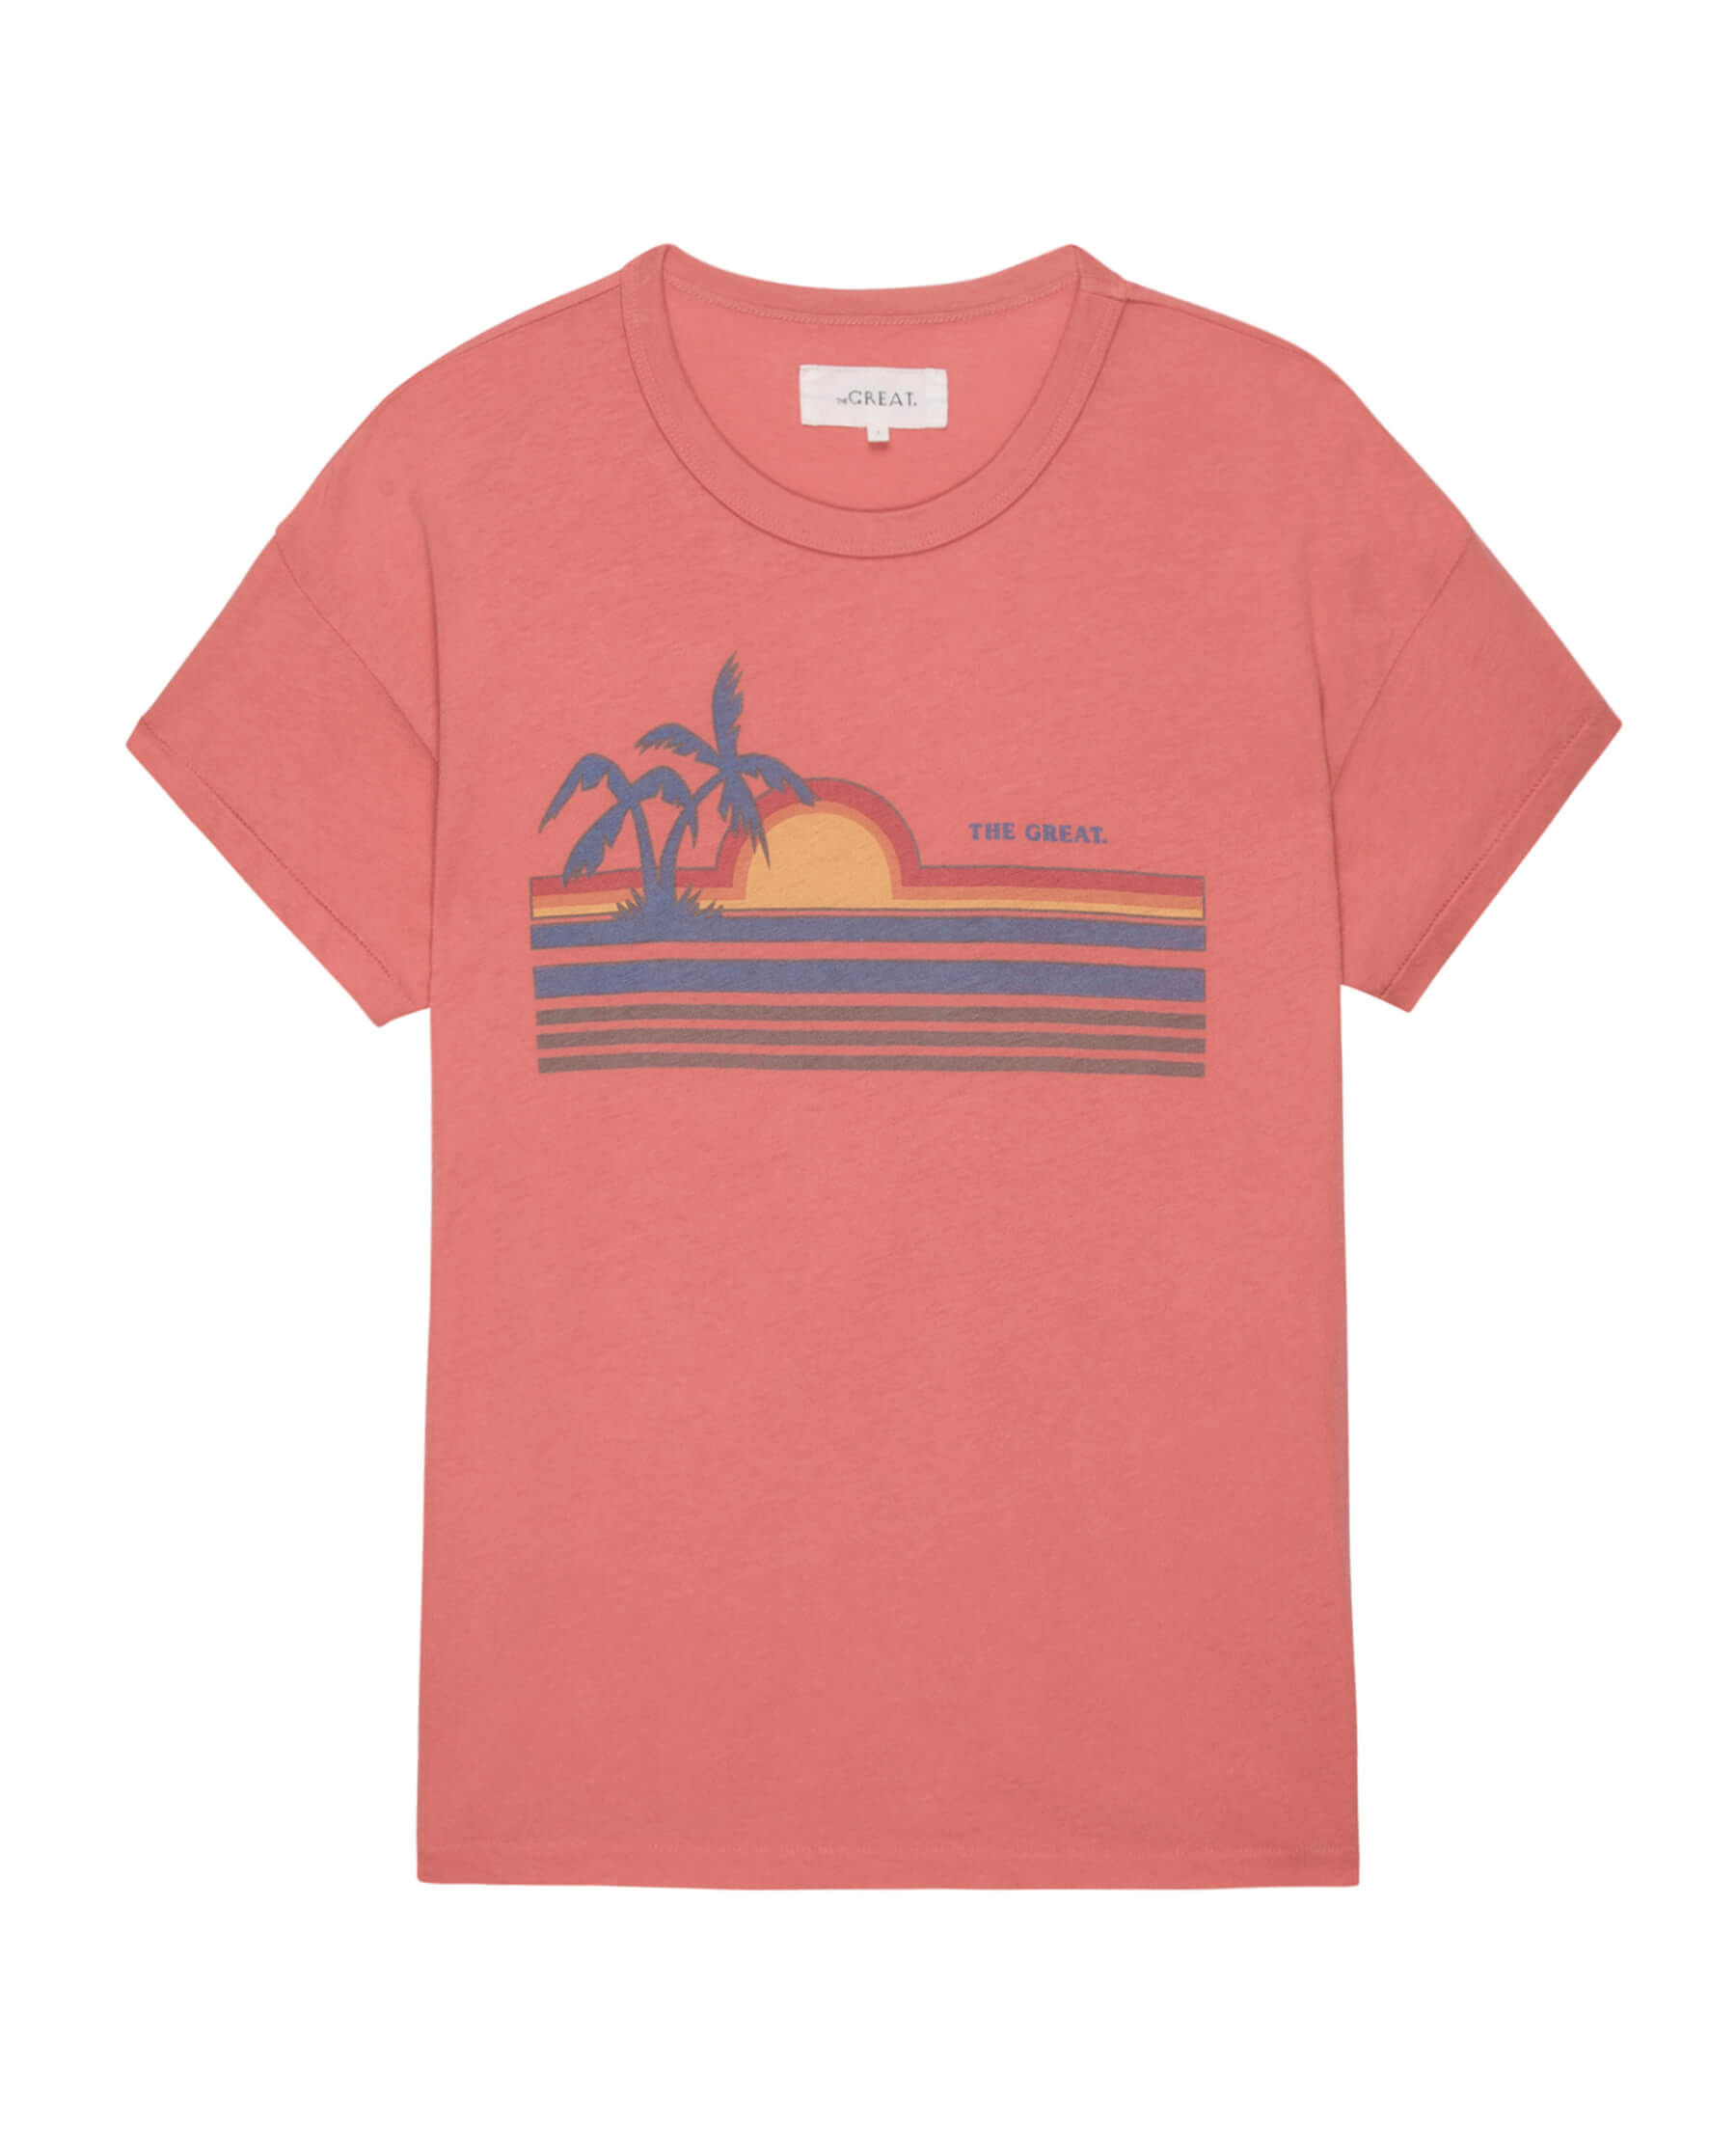 The Boxy Crew. Graphic -- Coral with Sunset Graphic